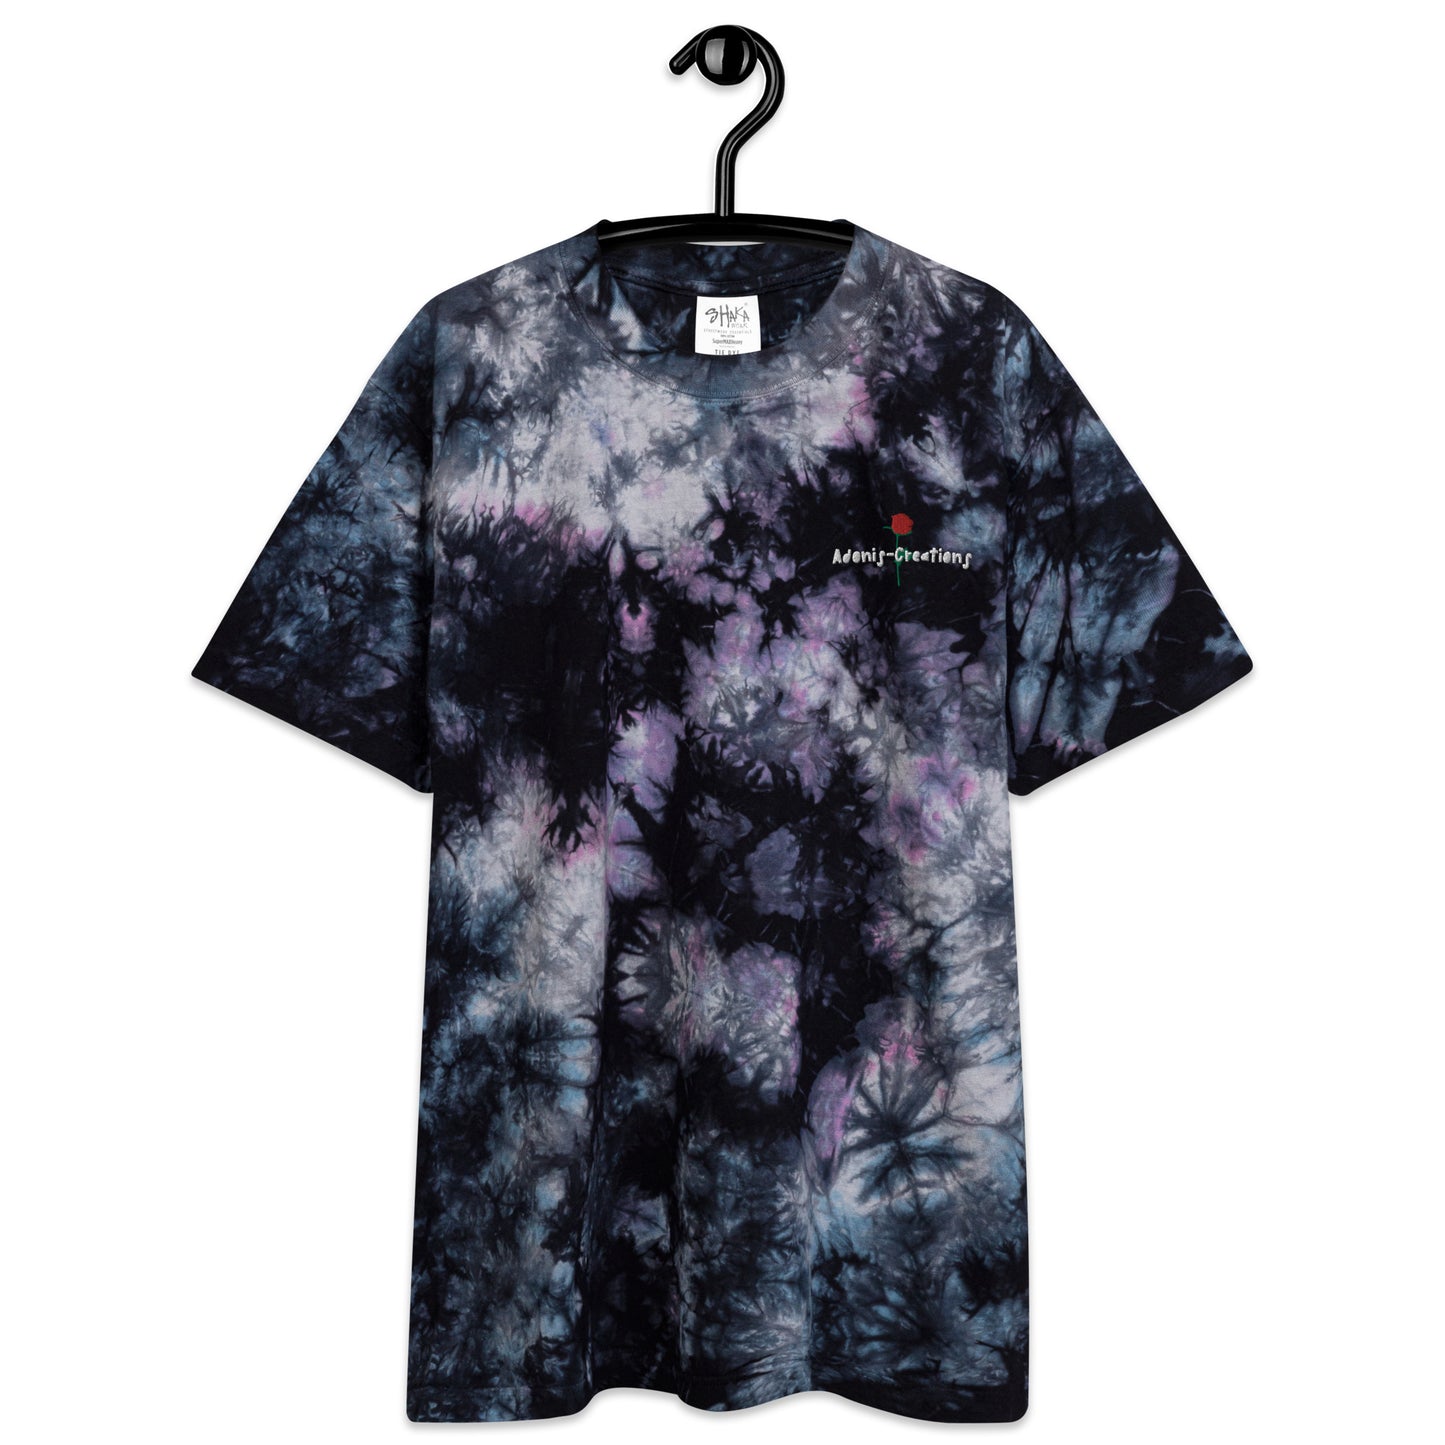 Adonis-Creations - Women's Oversized Embroidered Tie-Dye